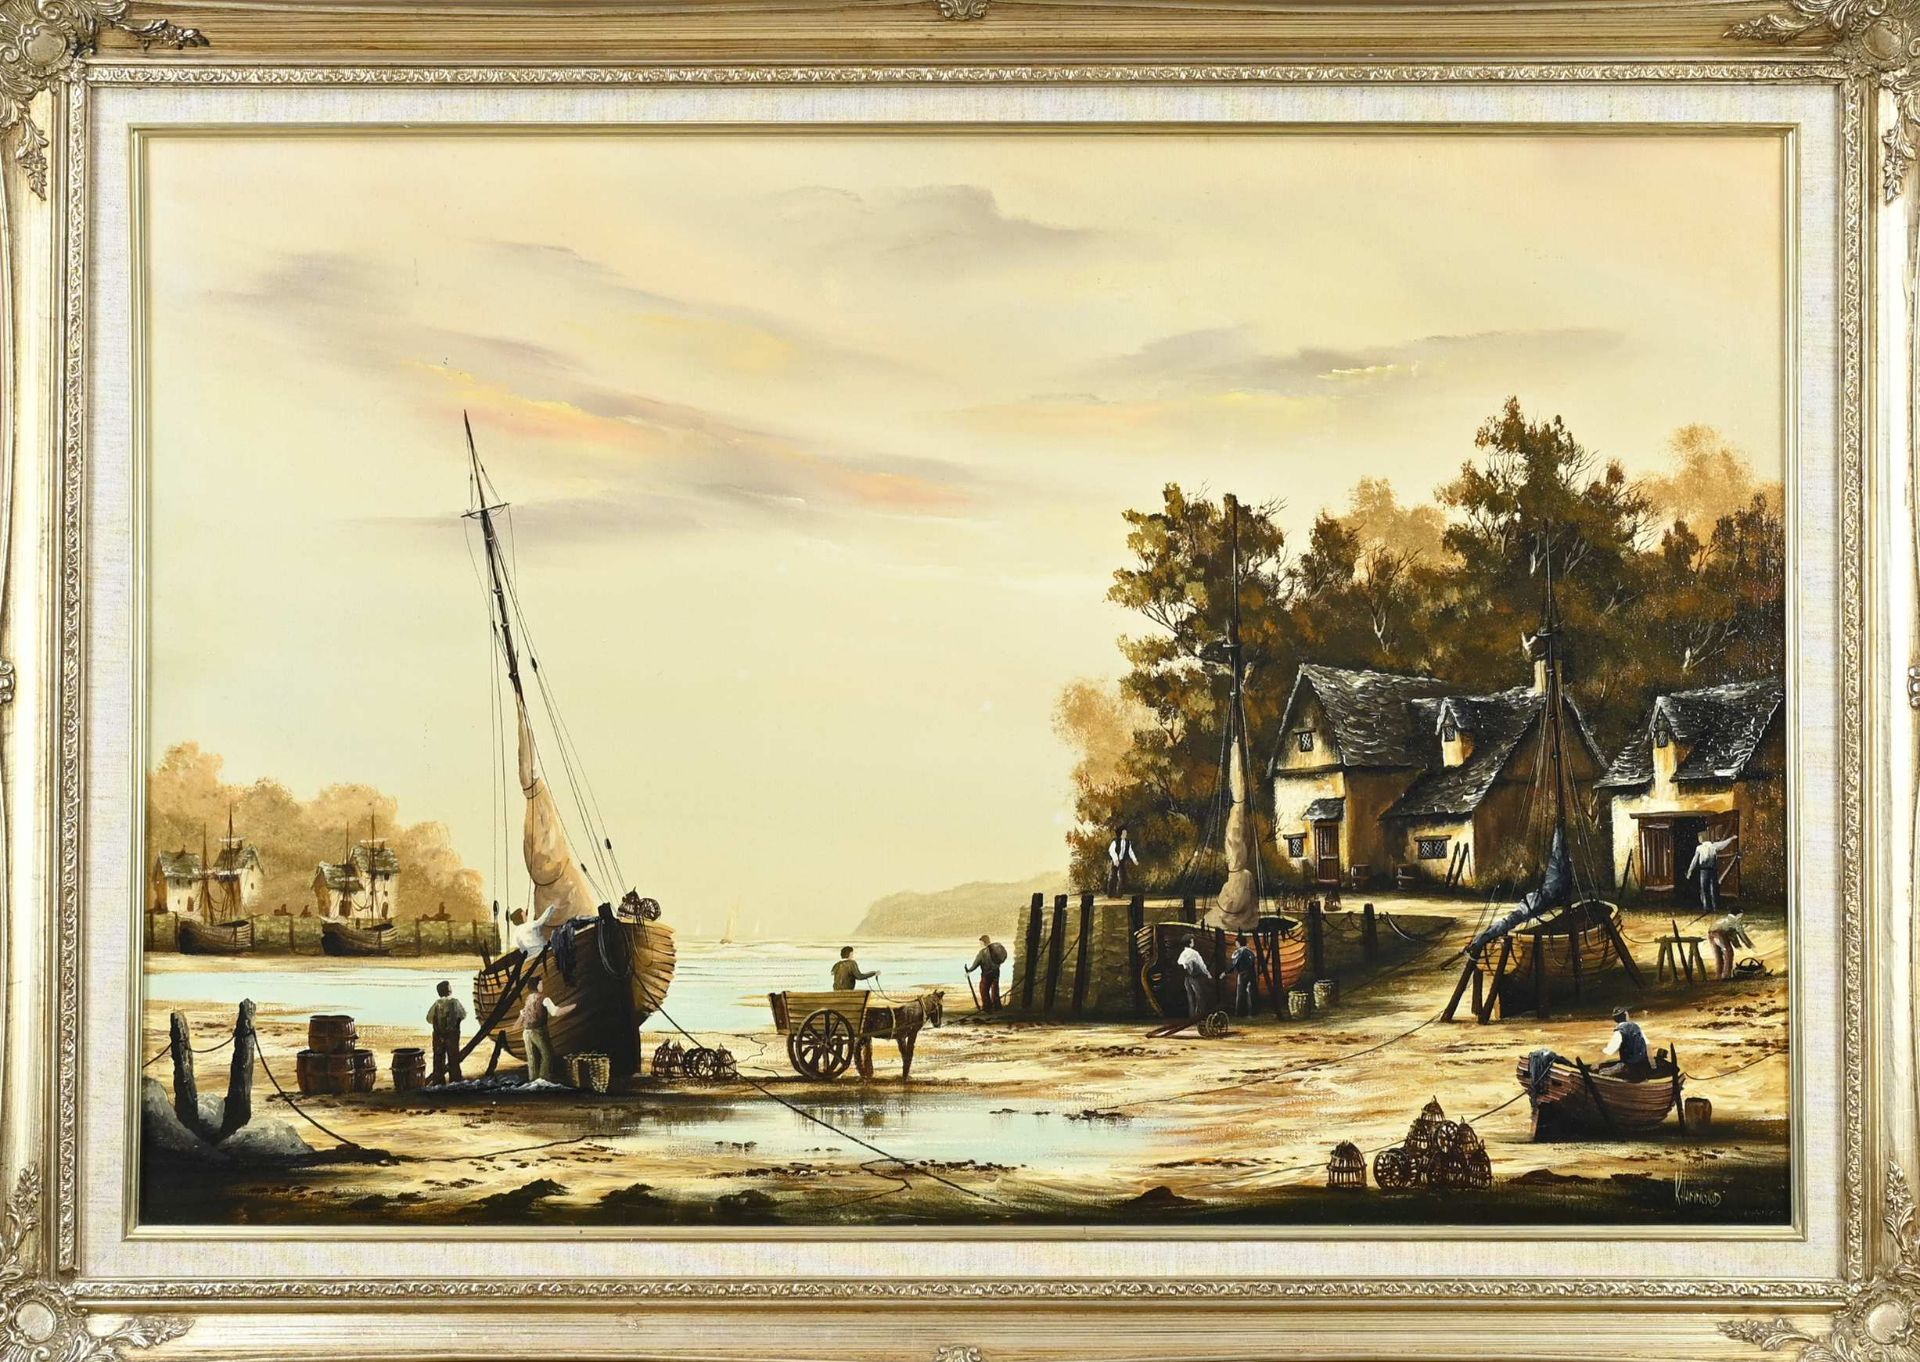 K. Hammond, River View with Boats and Figures